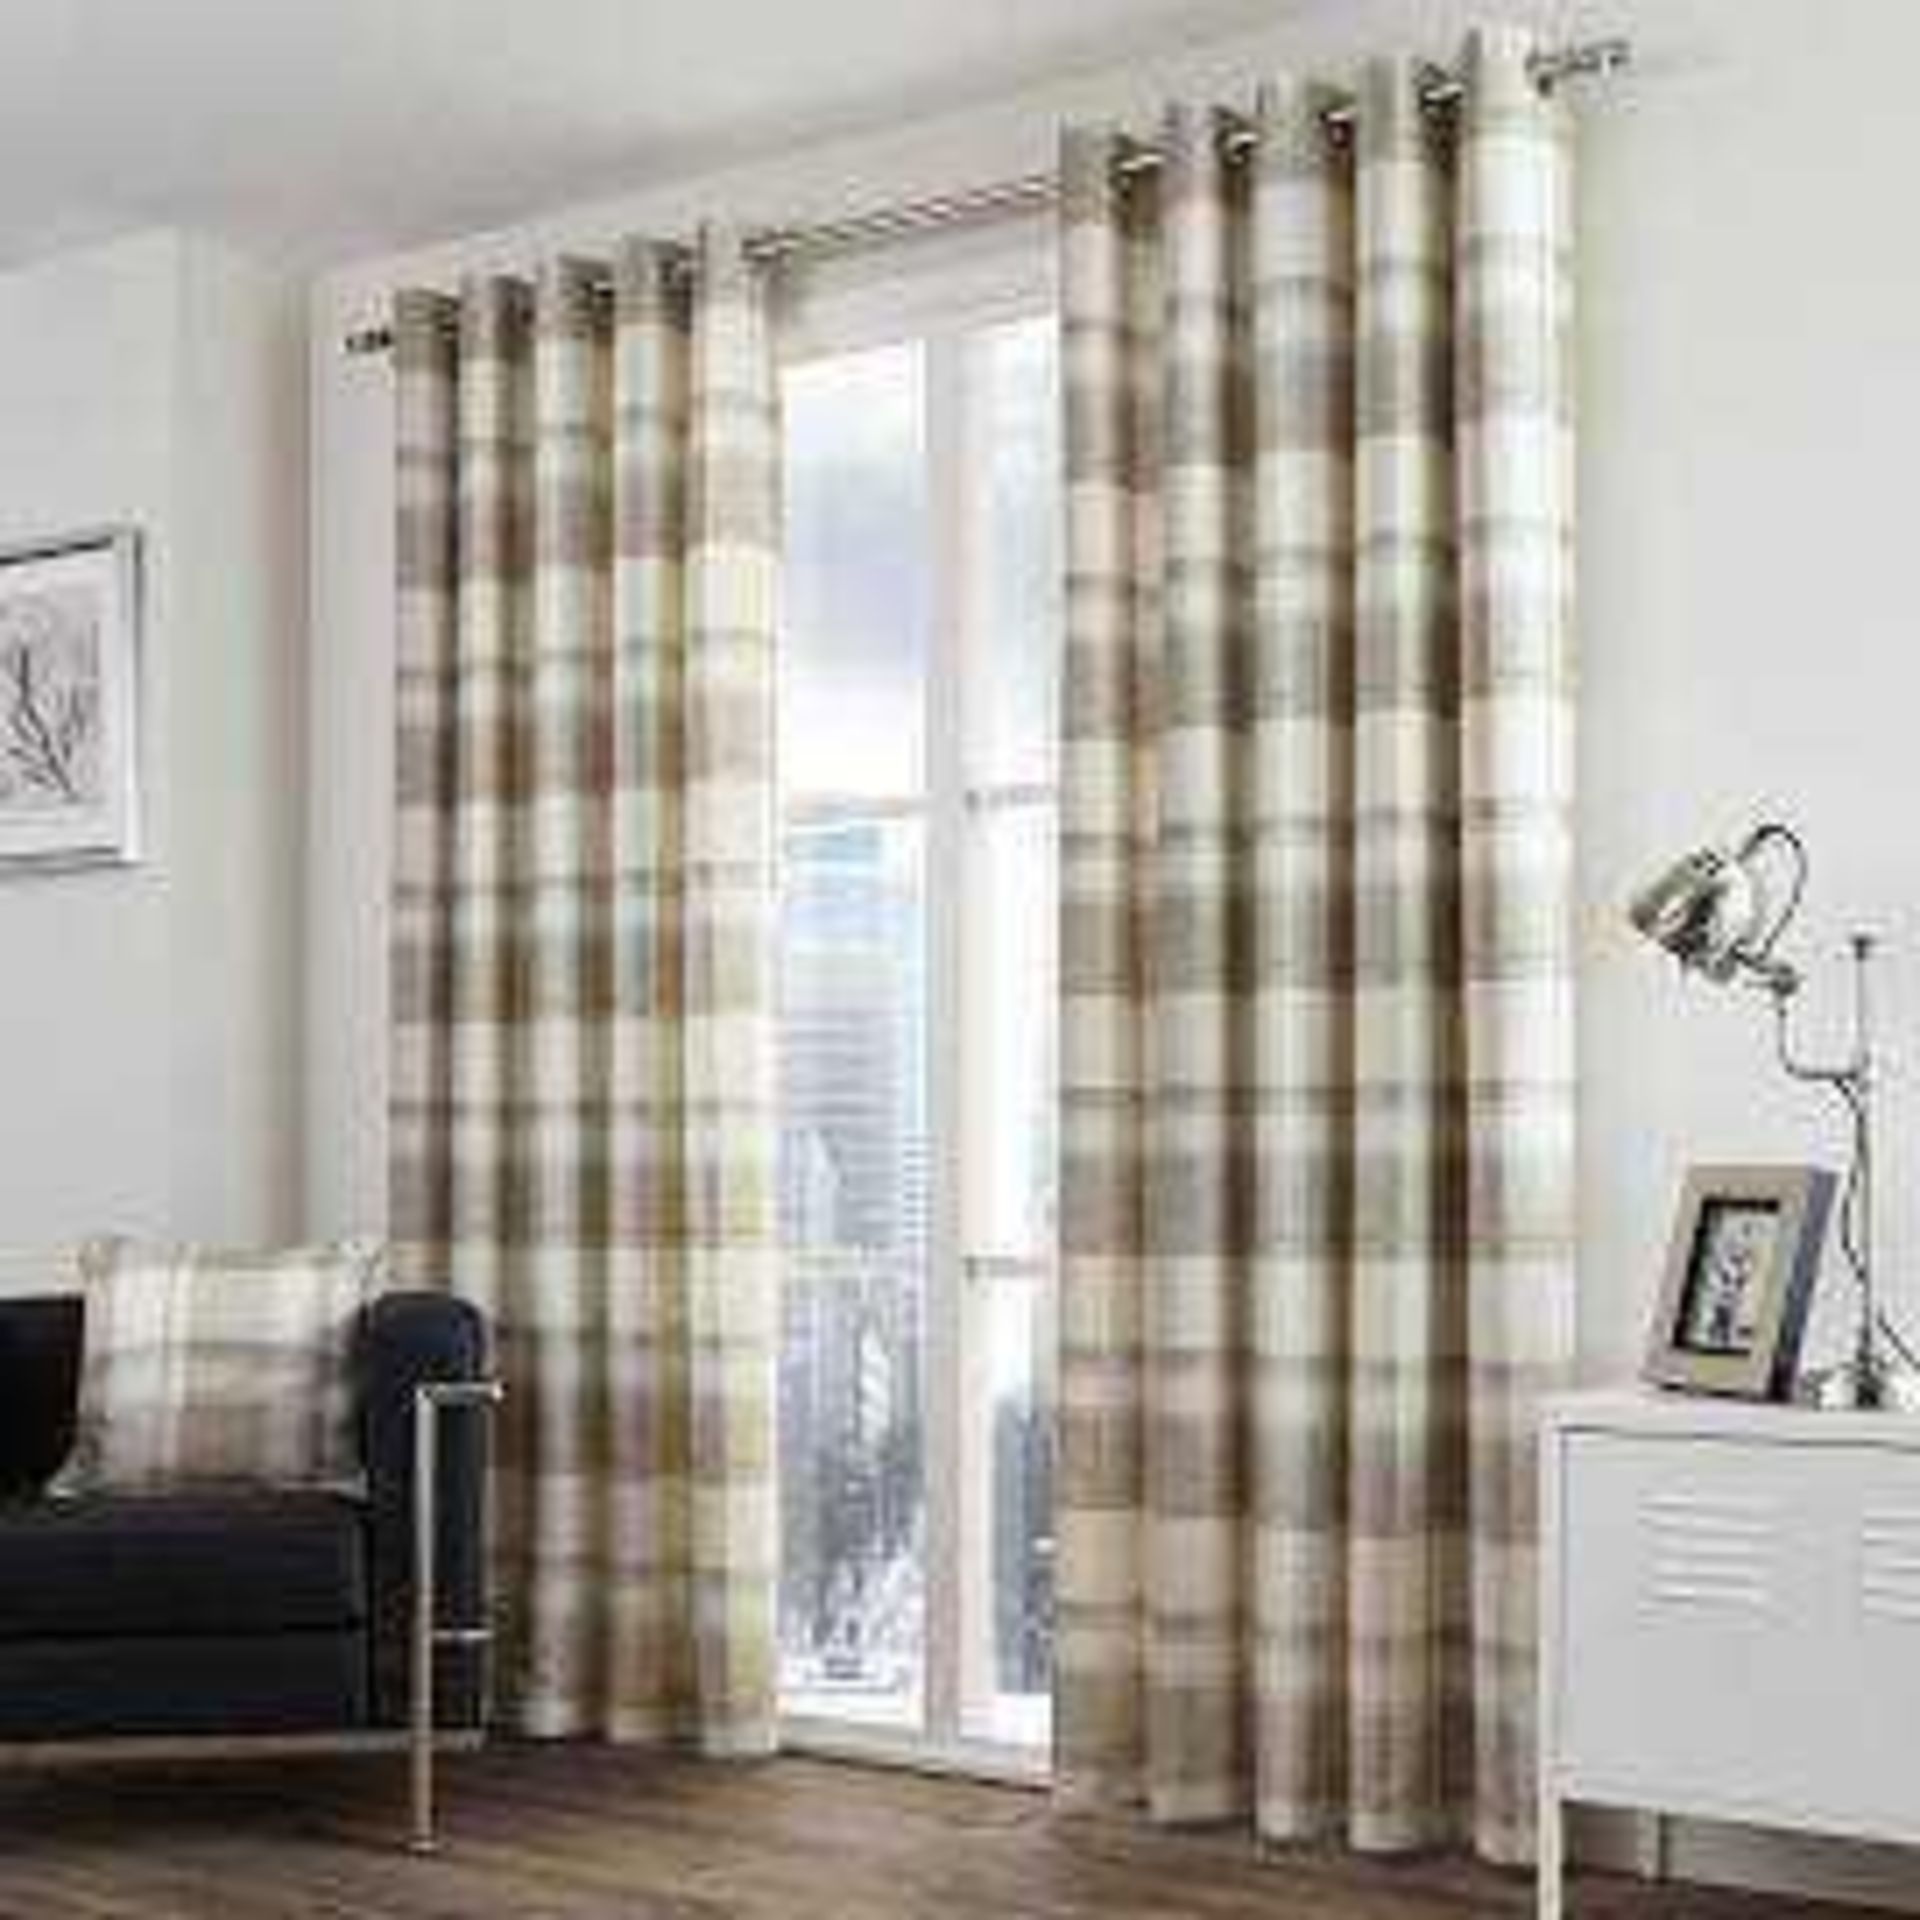 Combined Rrp £175 Lot To Contain 3 Assorted Curtains